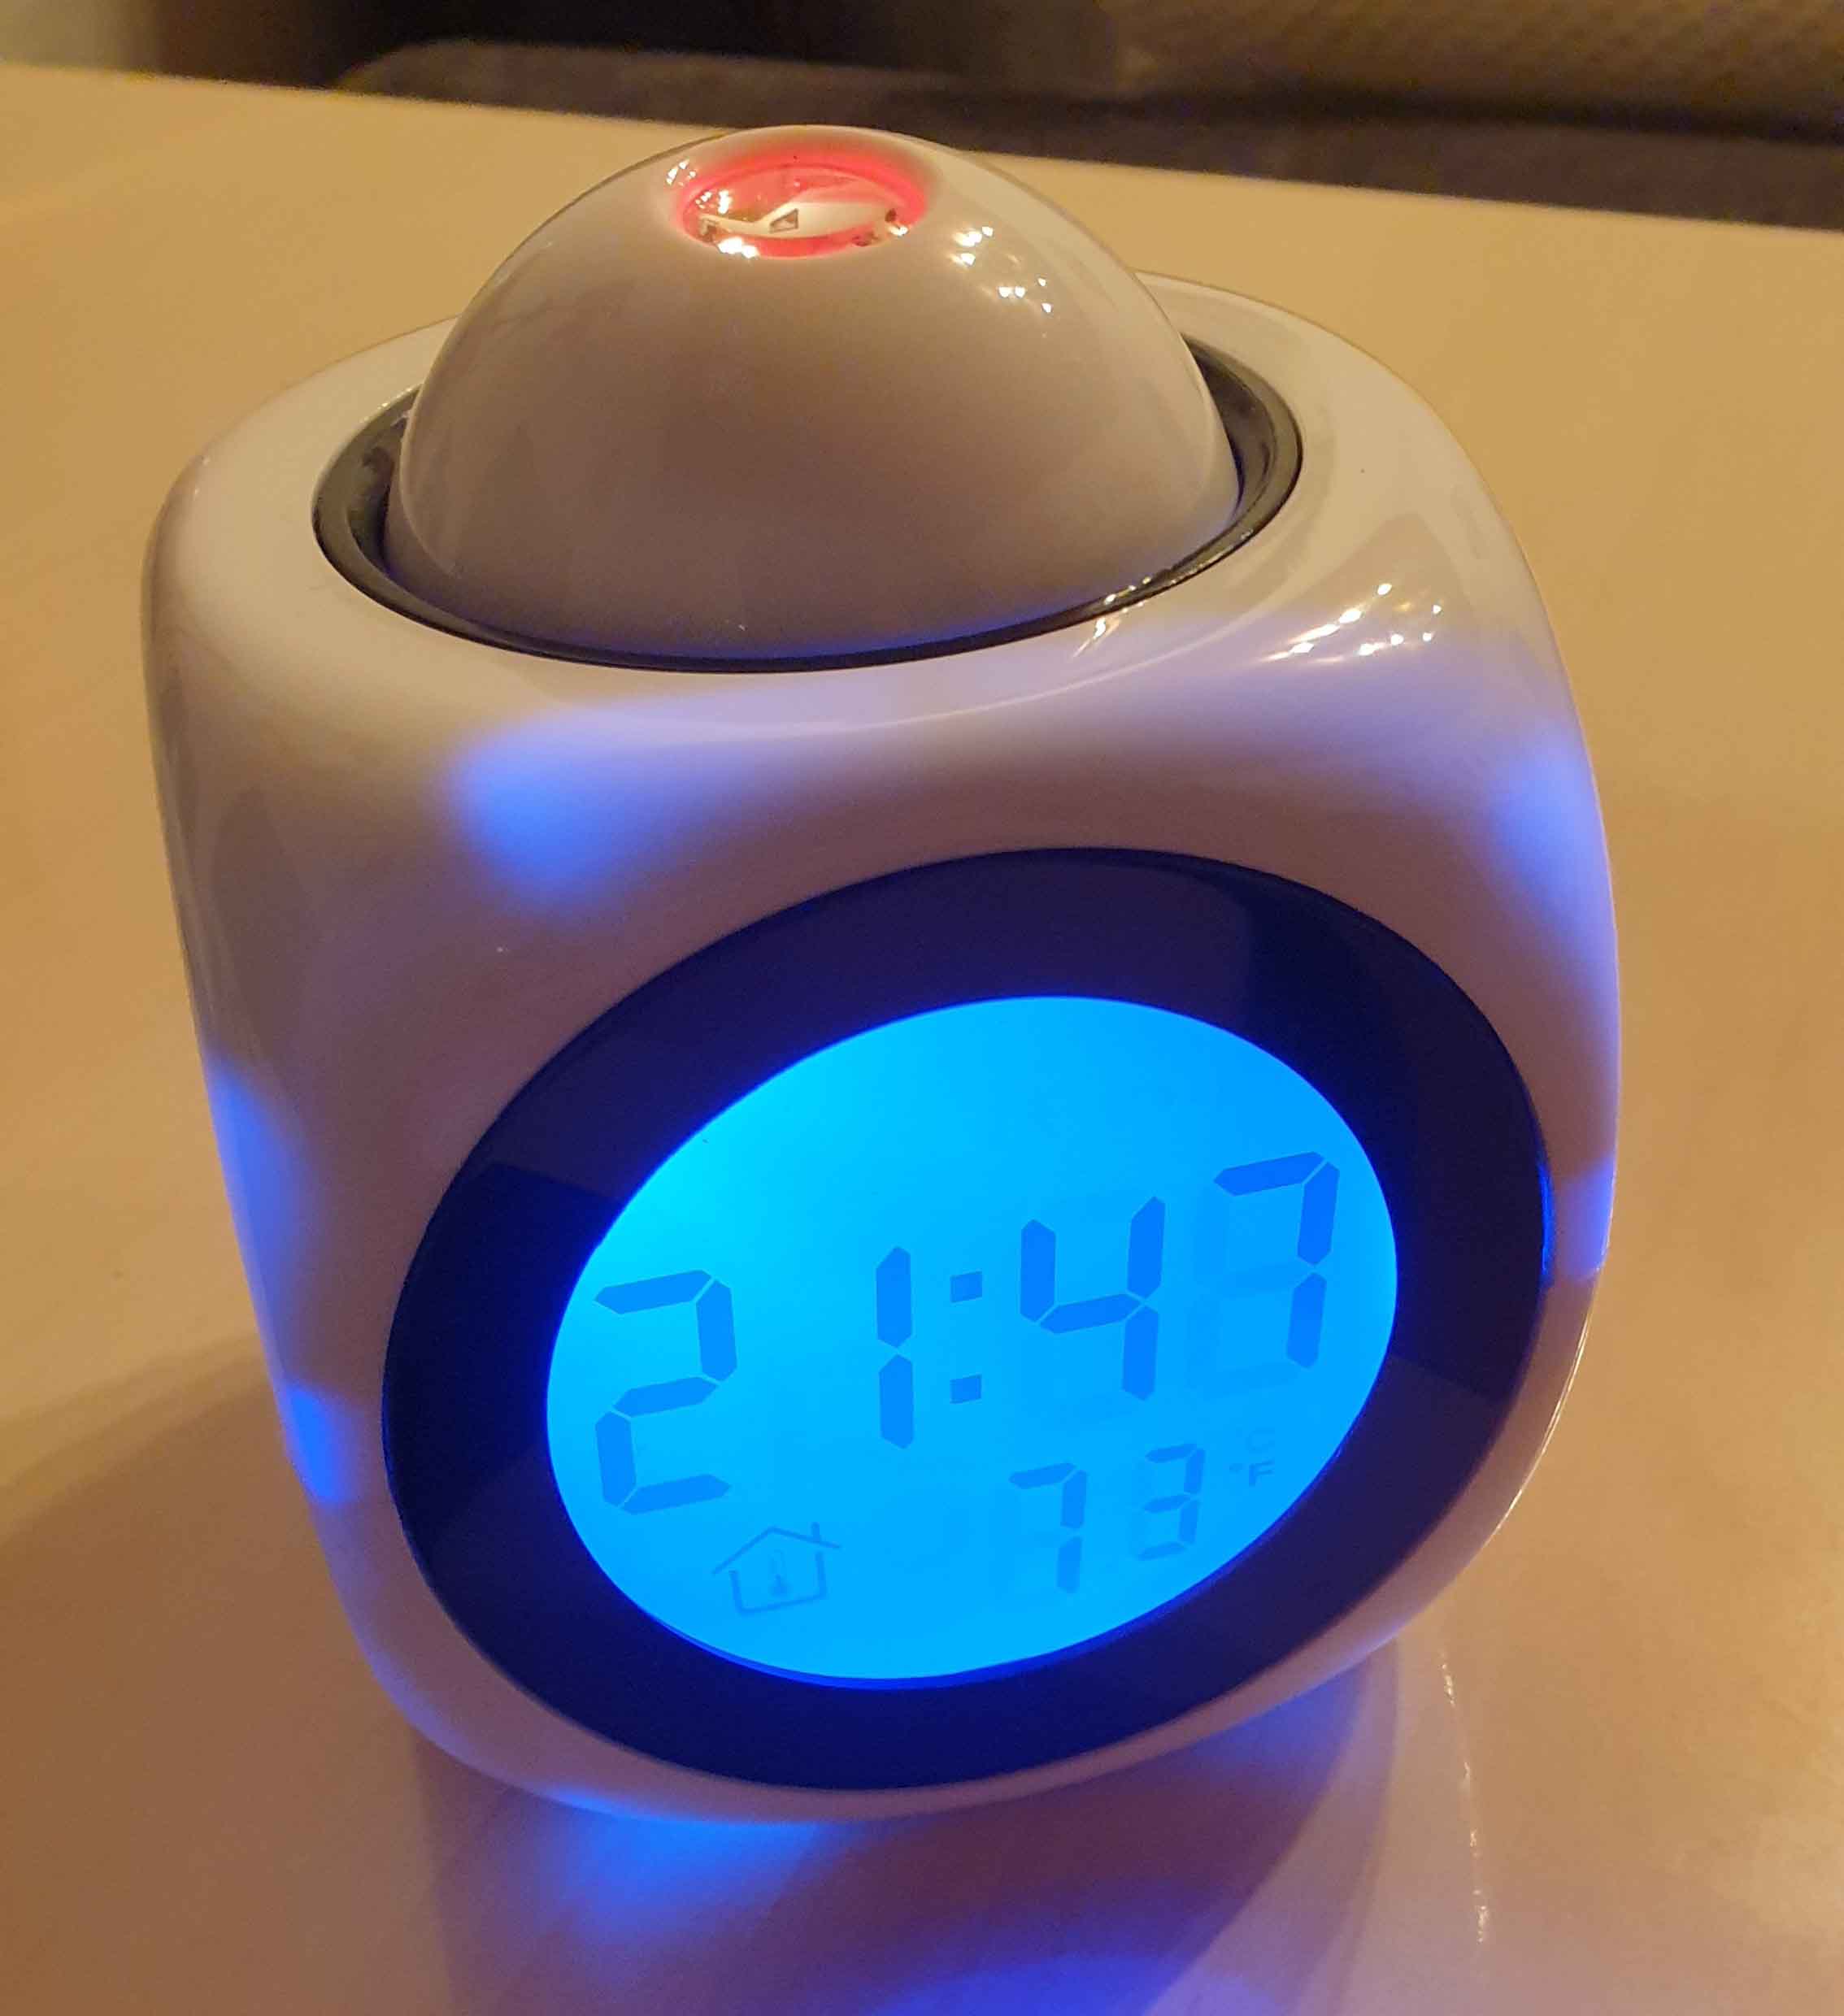 Digital Ceiling Projection Alarm Clock photo review